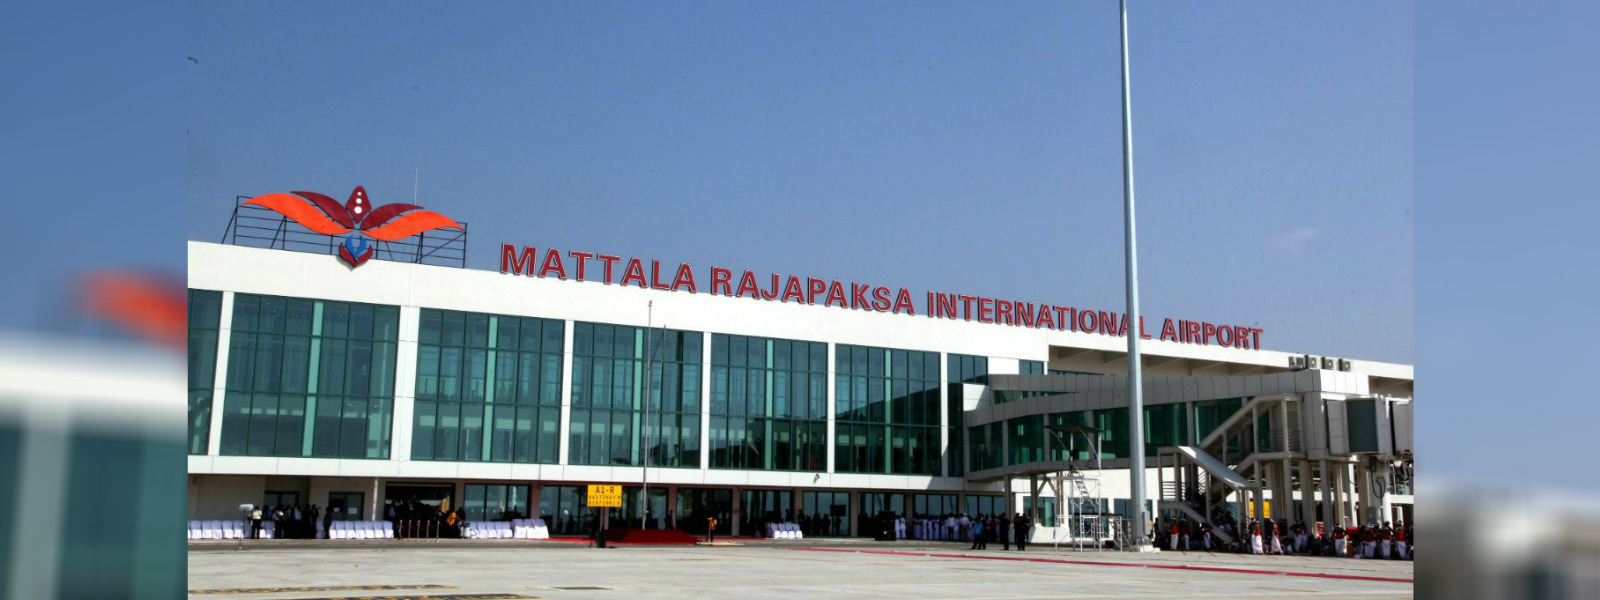 2 flights diverted to MRIA due to bad weather